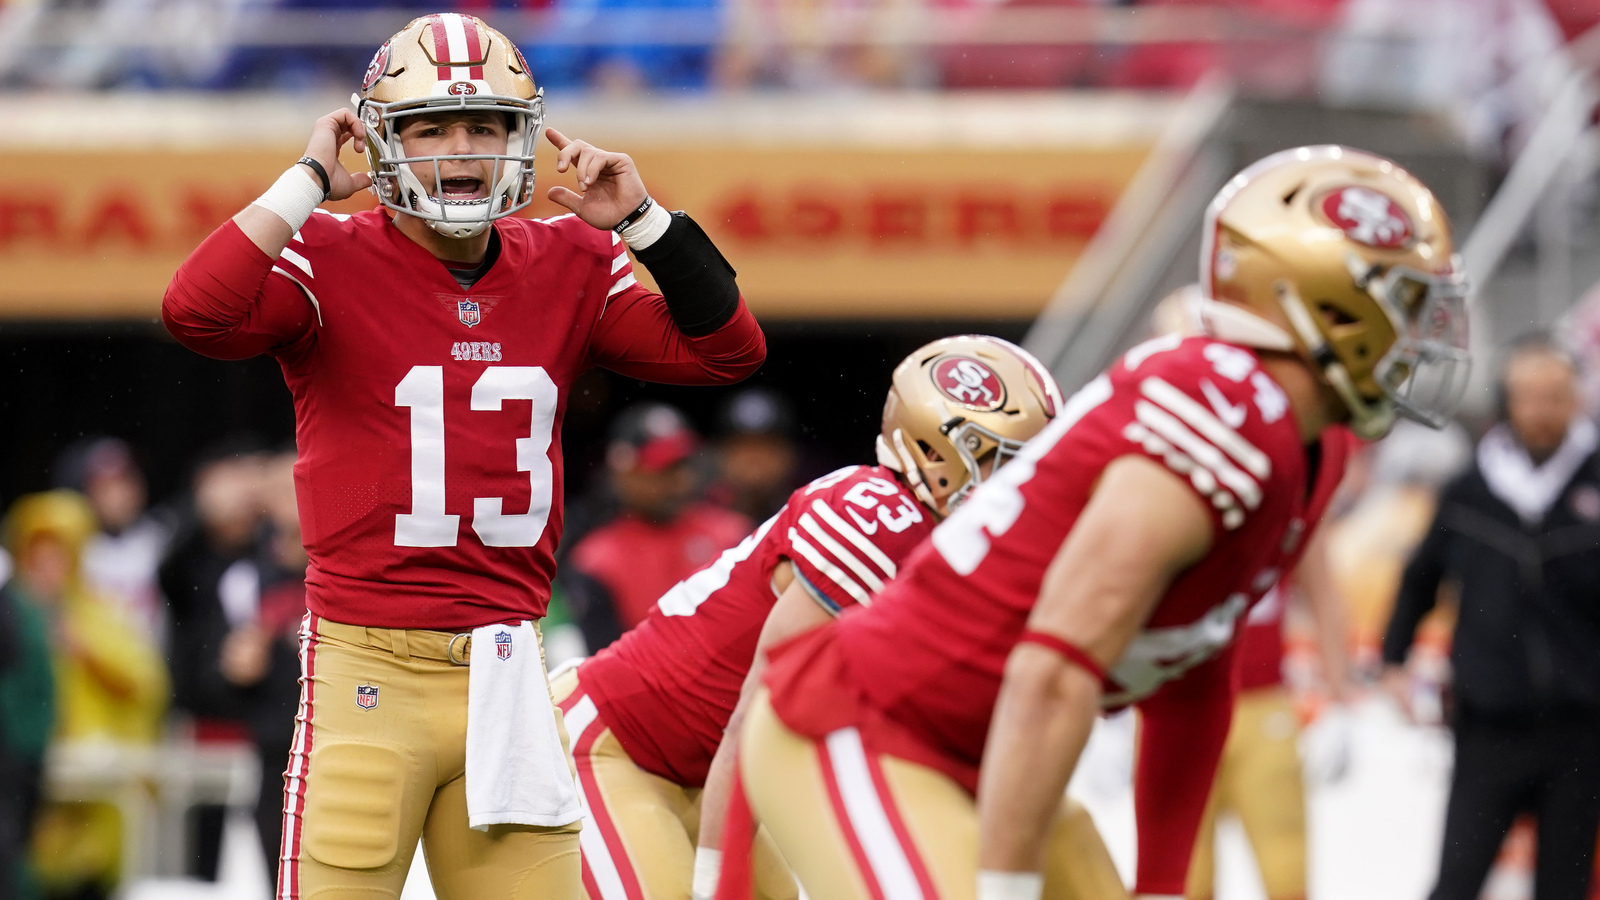 Things may get Purdy ugly for Niners